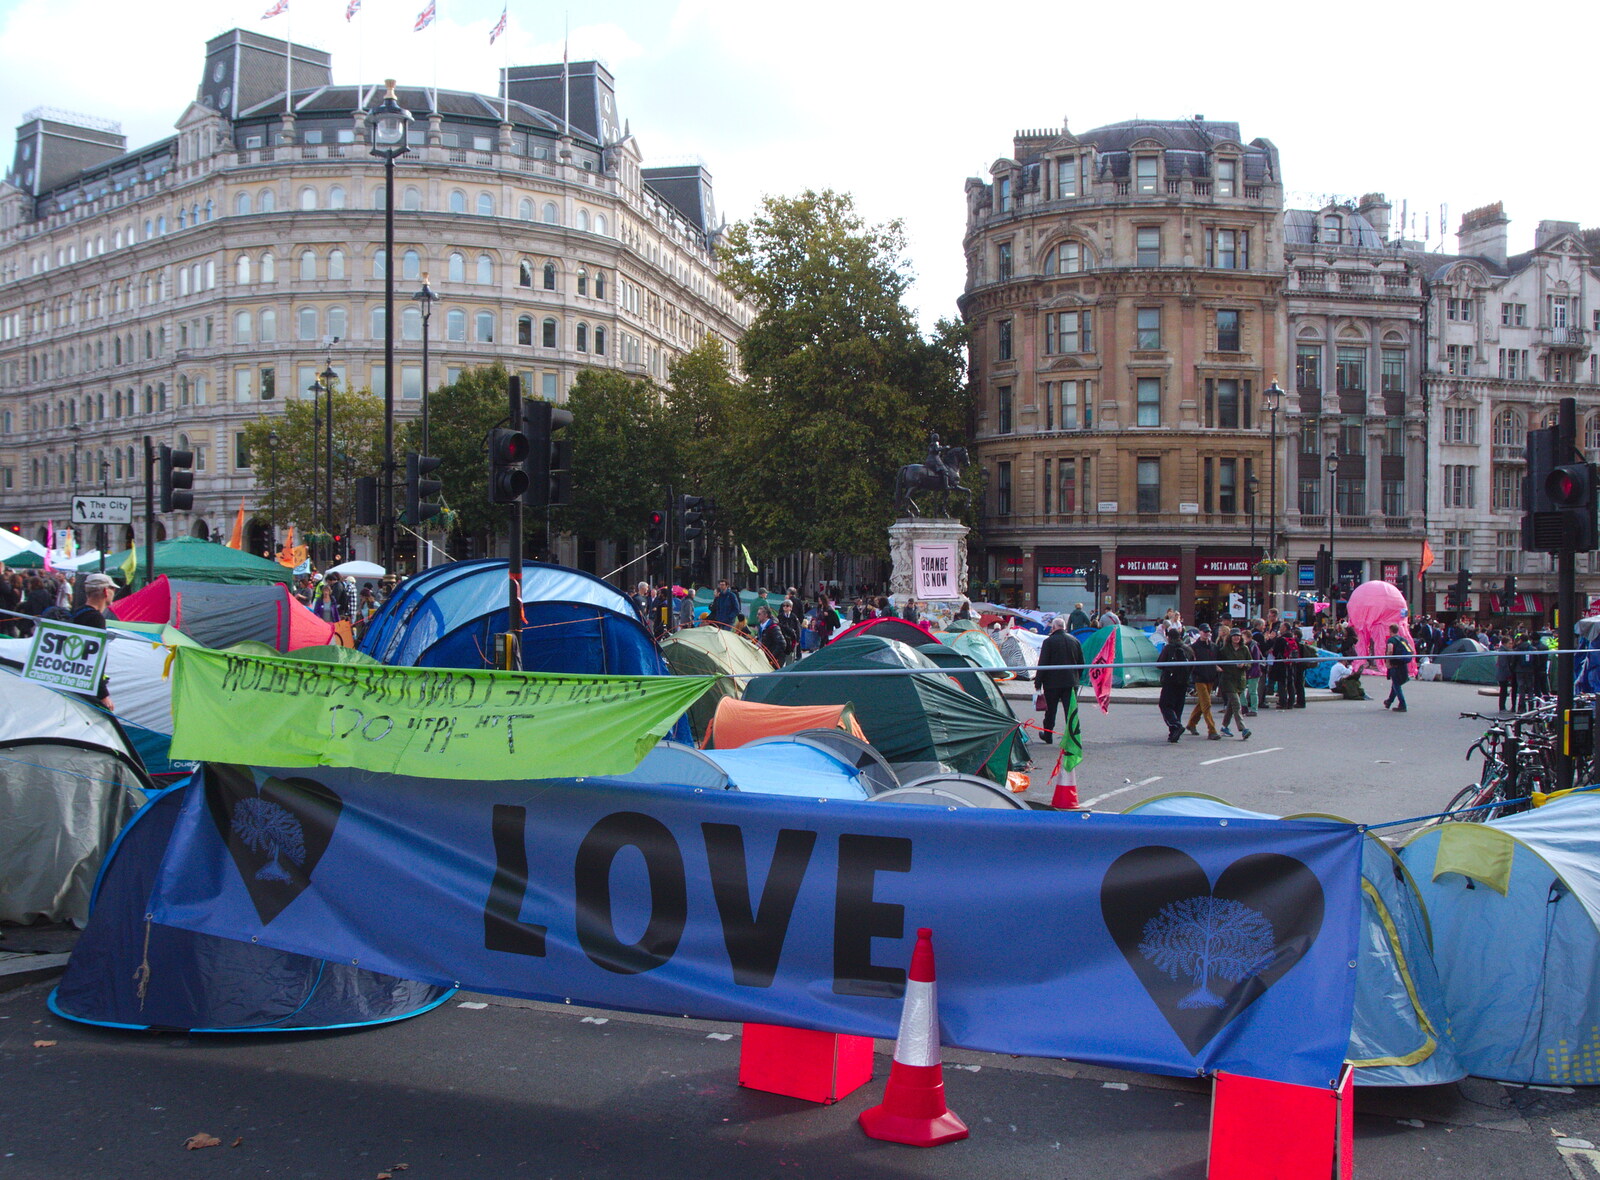 A Love banner from The Extinction Rebellion Protest, Westminster, London - 9th October 2019